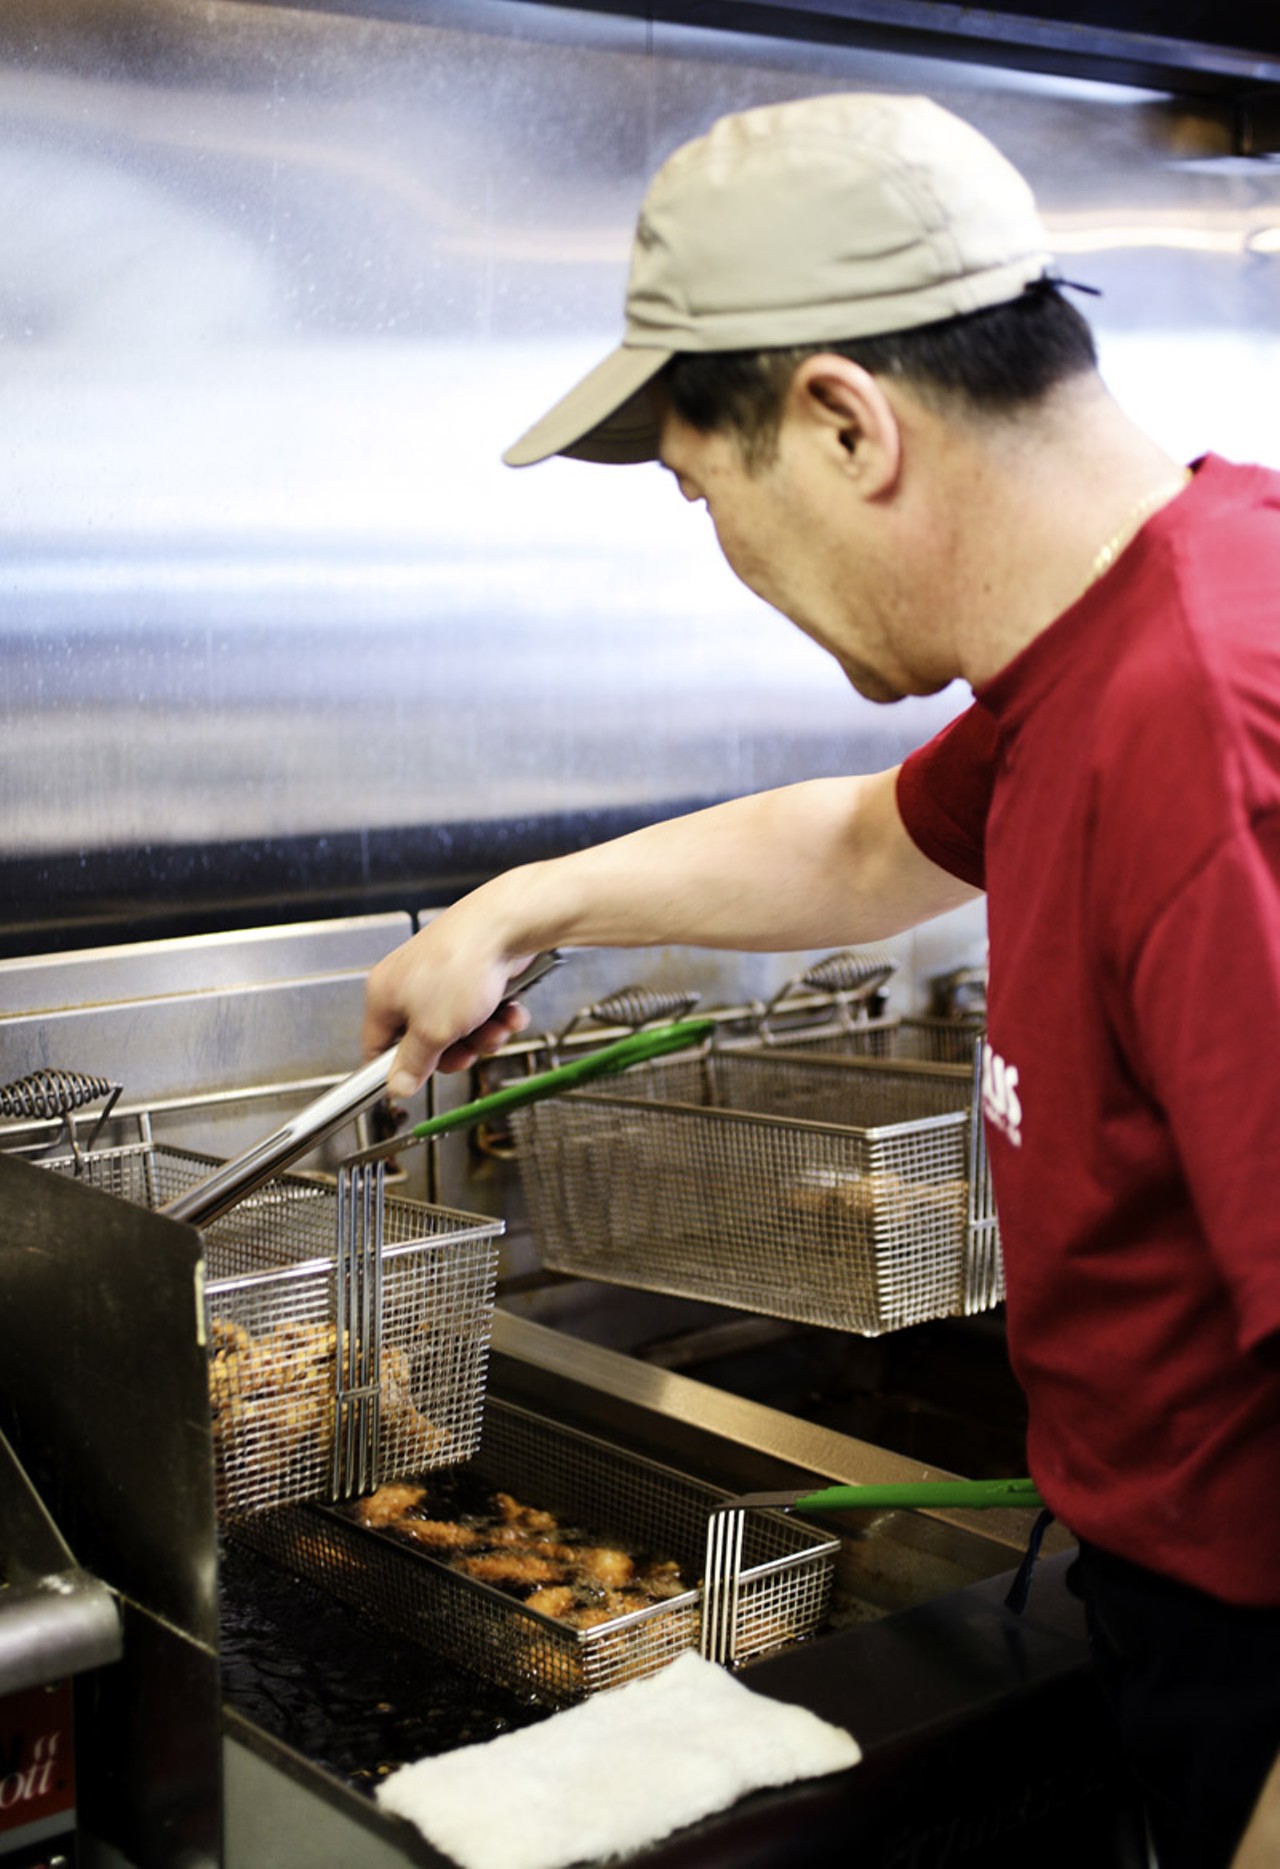 Owner Steve Song at work in the kitchen of O! Wing Plus in Overland, Missouri.